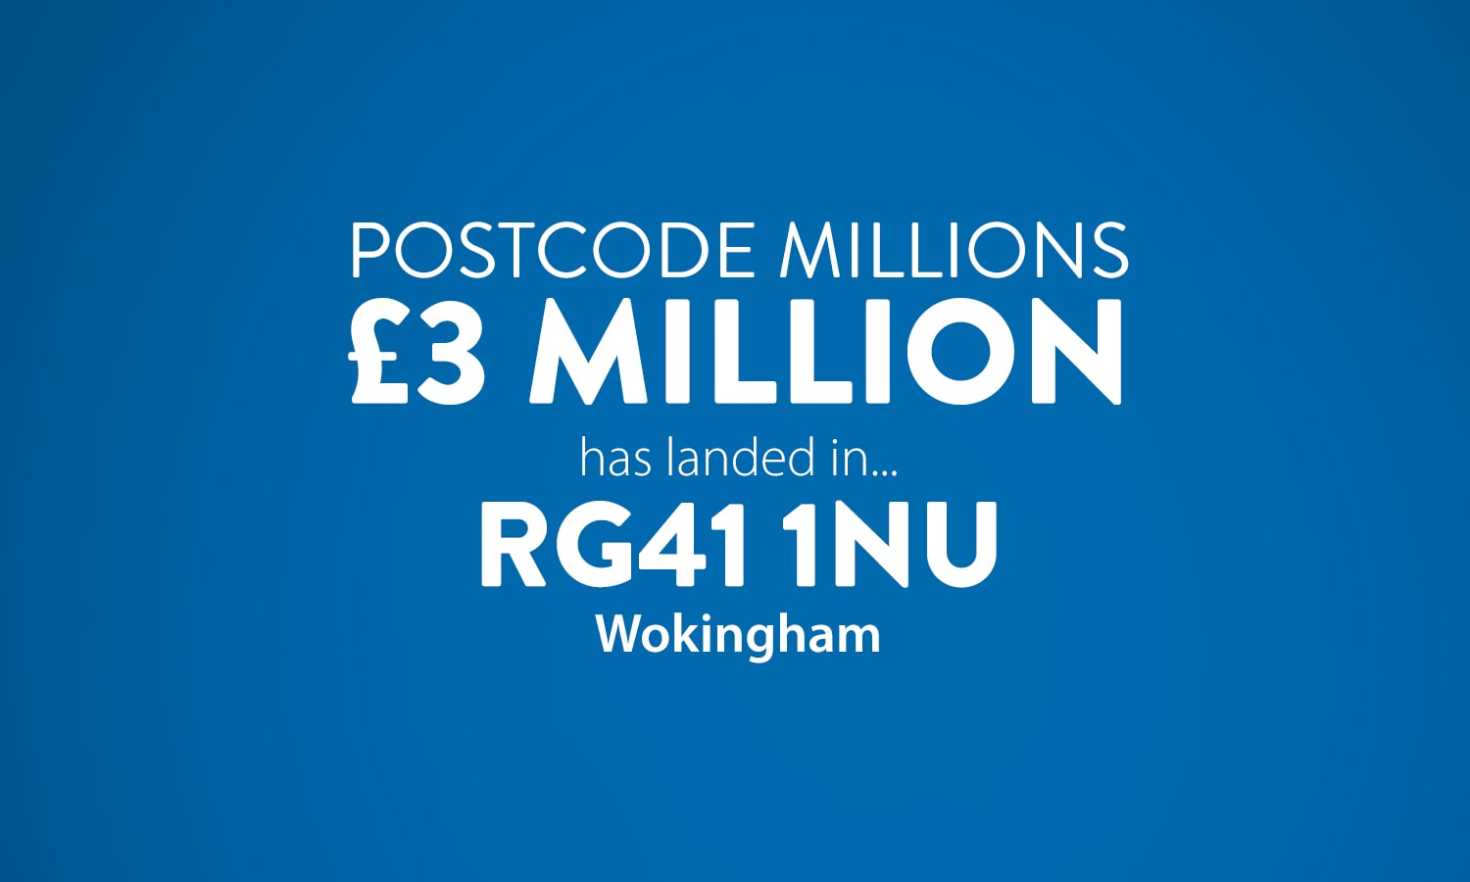 This month's Postcode Millions prize has landed in a Wokingham postcode sector